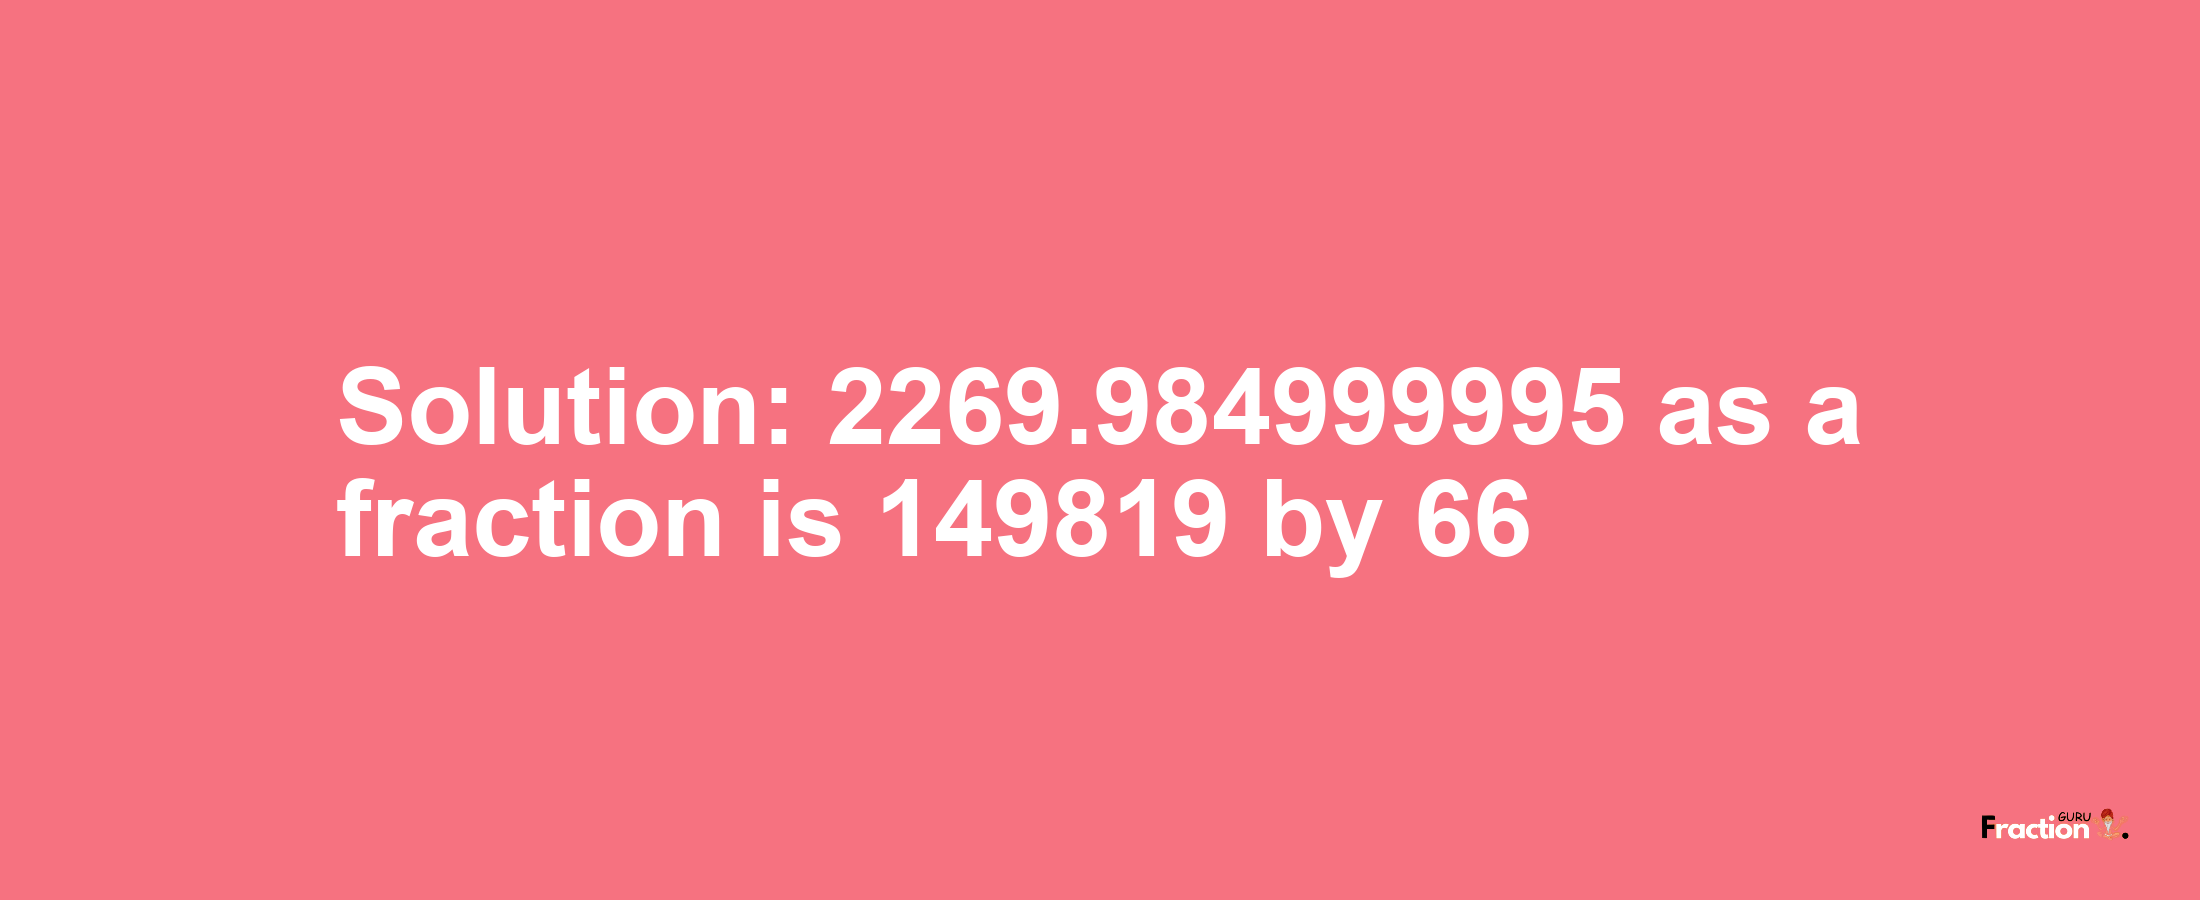 Solution:2269.984999995 as a fraction is 149819/66